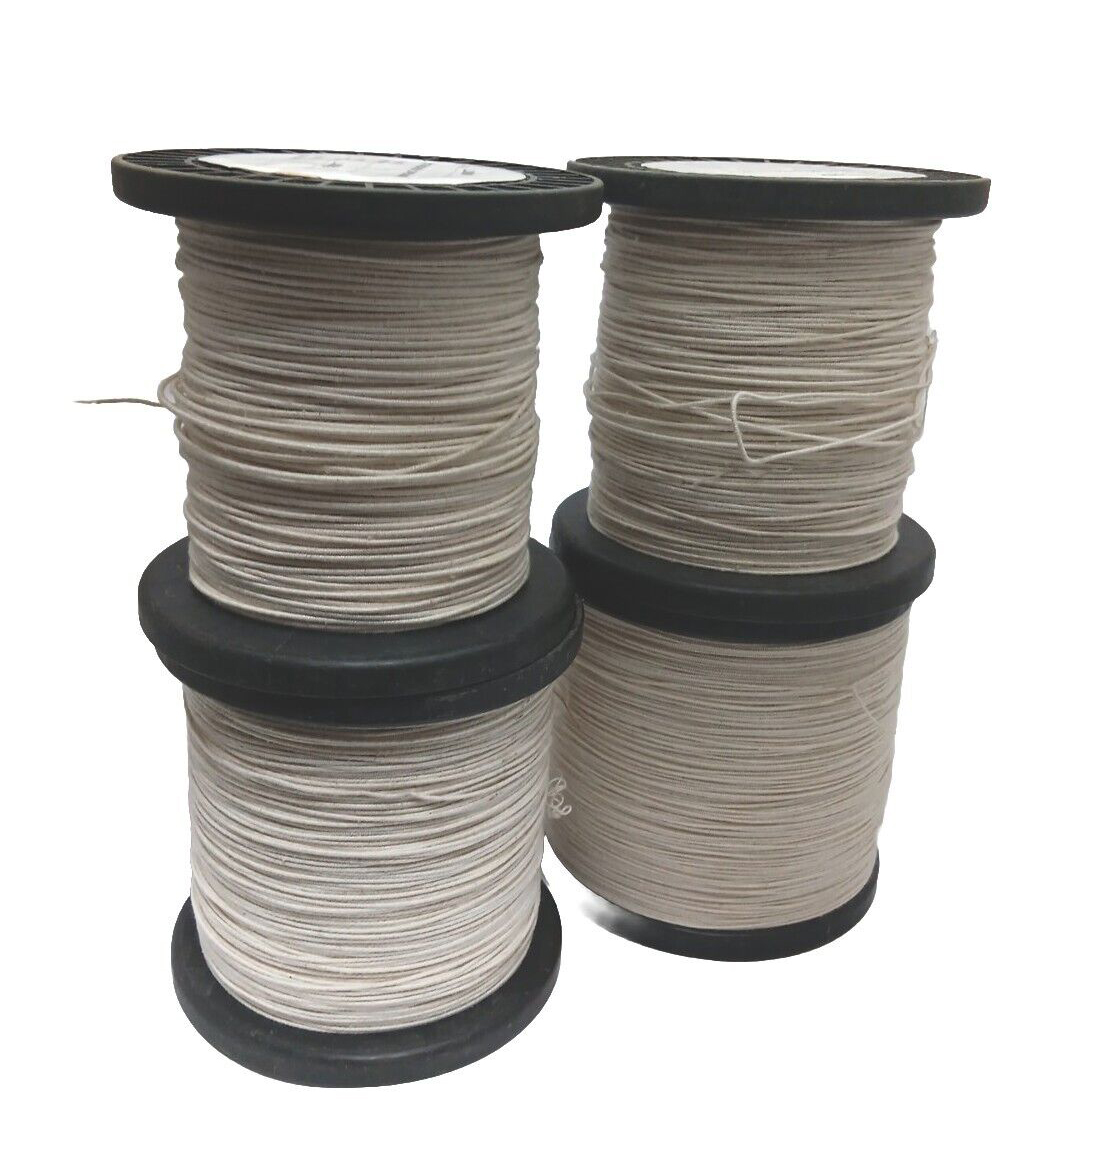 1kg 0.45mm High Build Cotton Covered Copper Craft Wire [1mm OD]